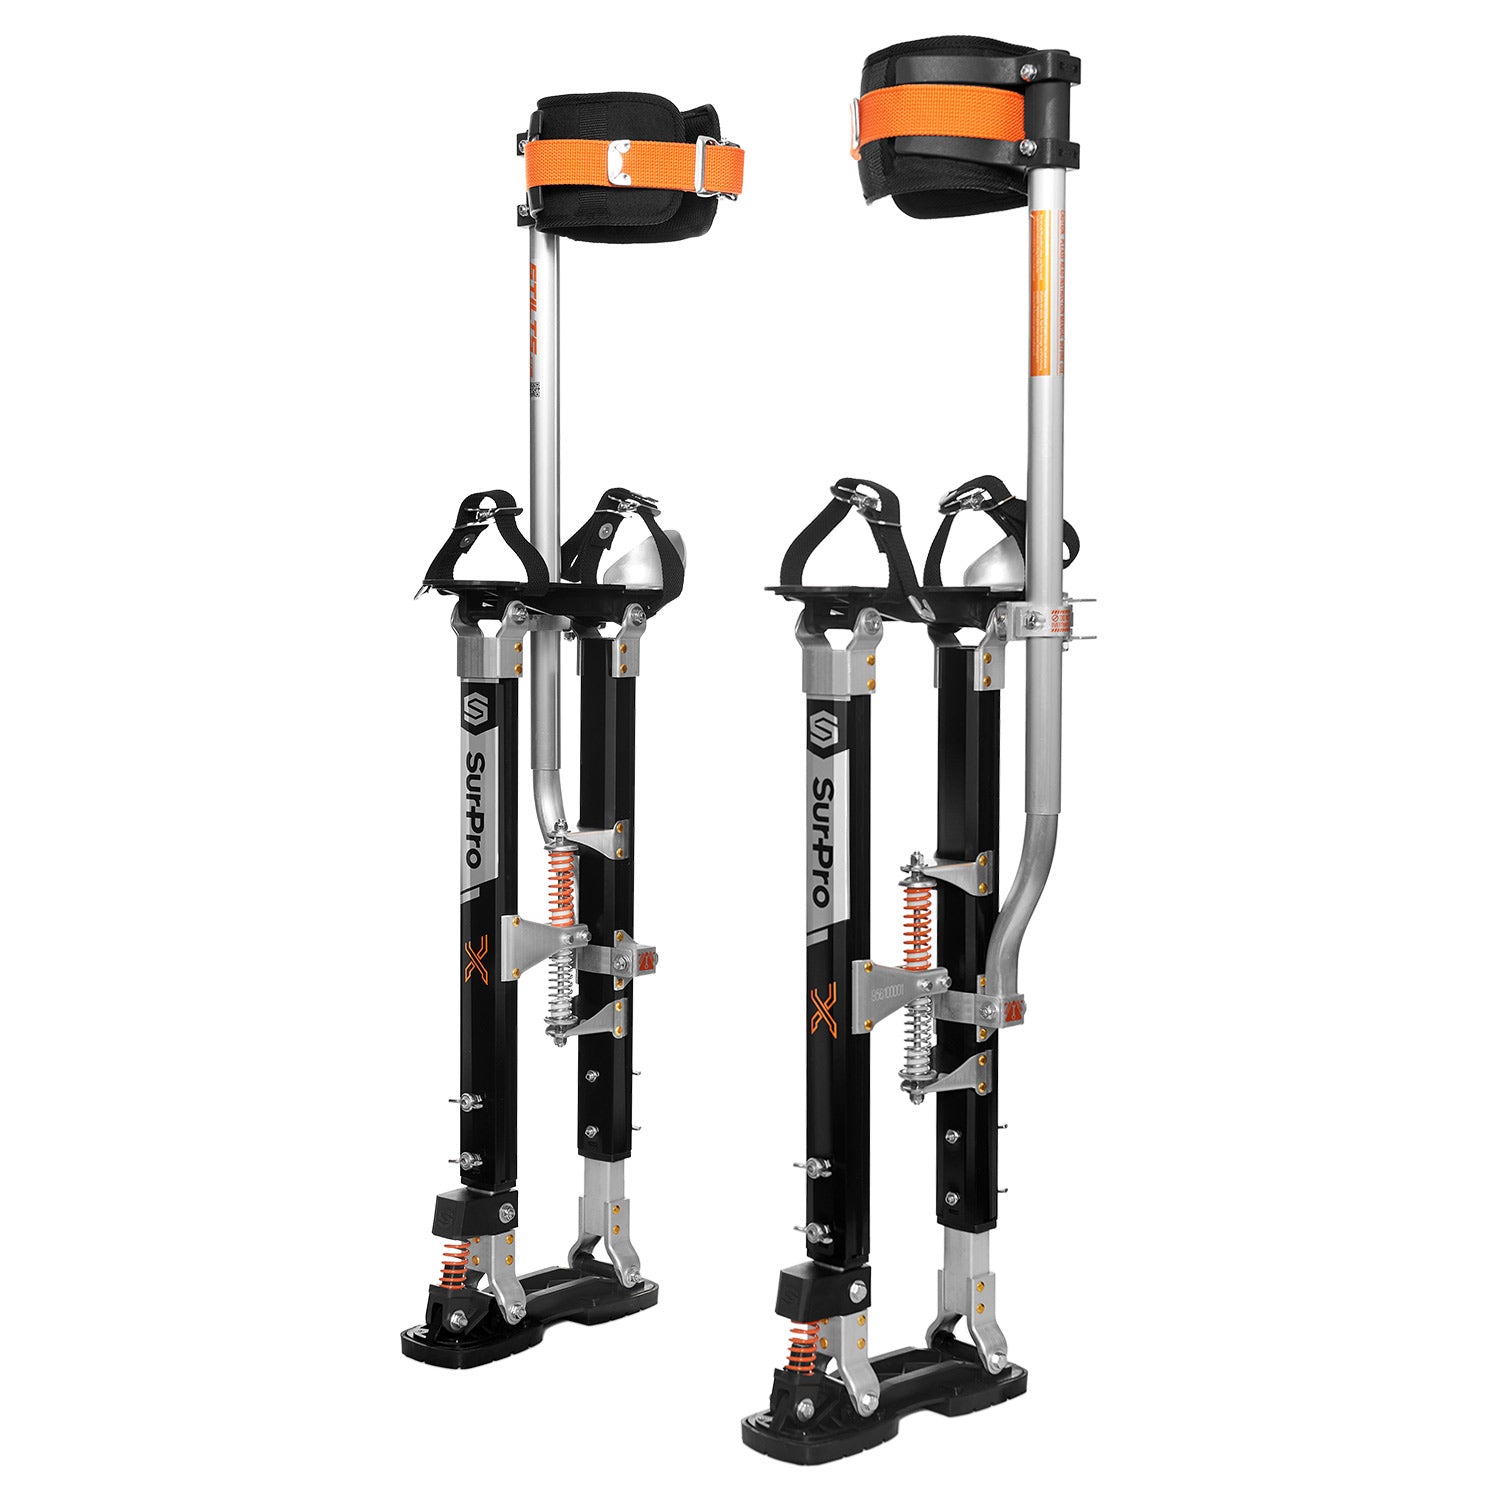 SurPro S1X Magnesium Drywall Stilts side view